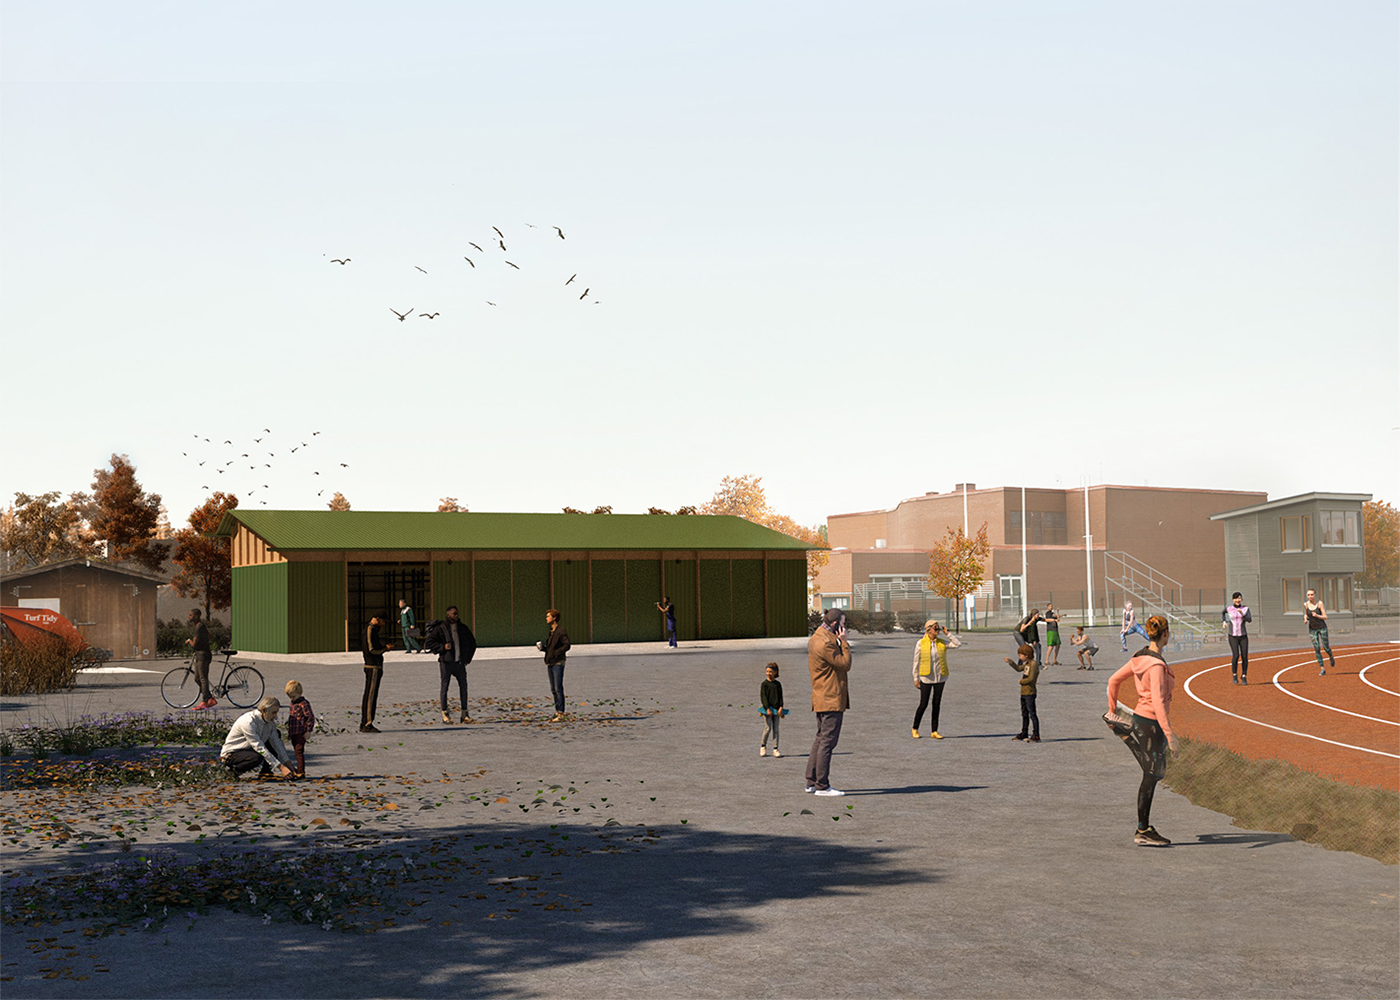 Illustration of a storage building for outdoor sports facilities